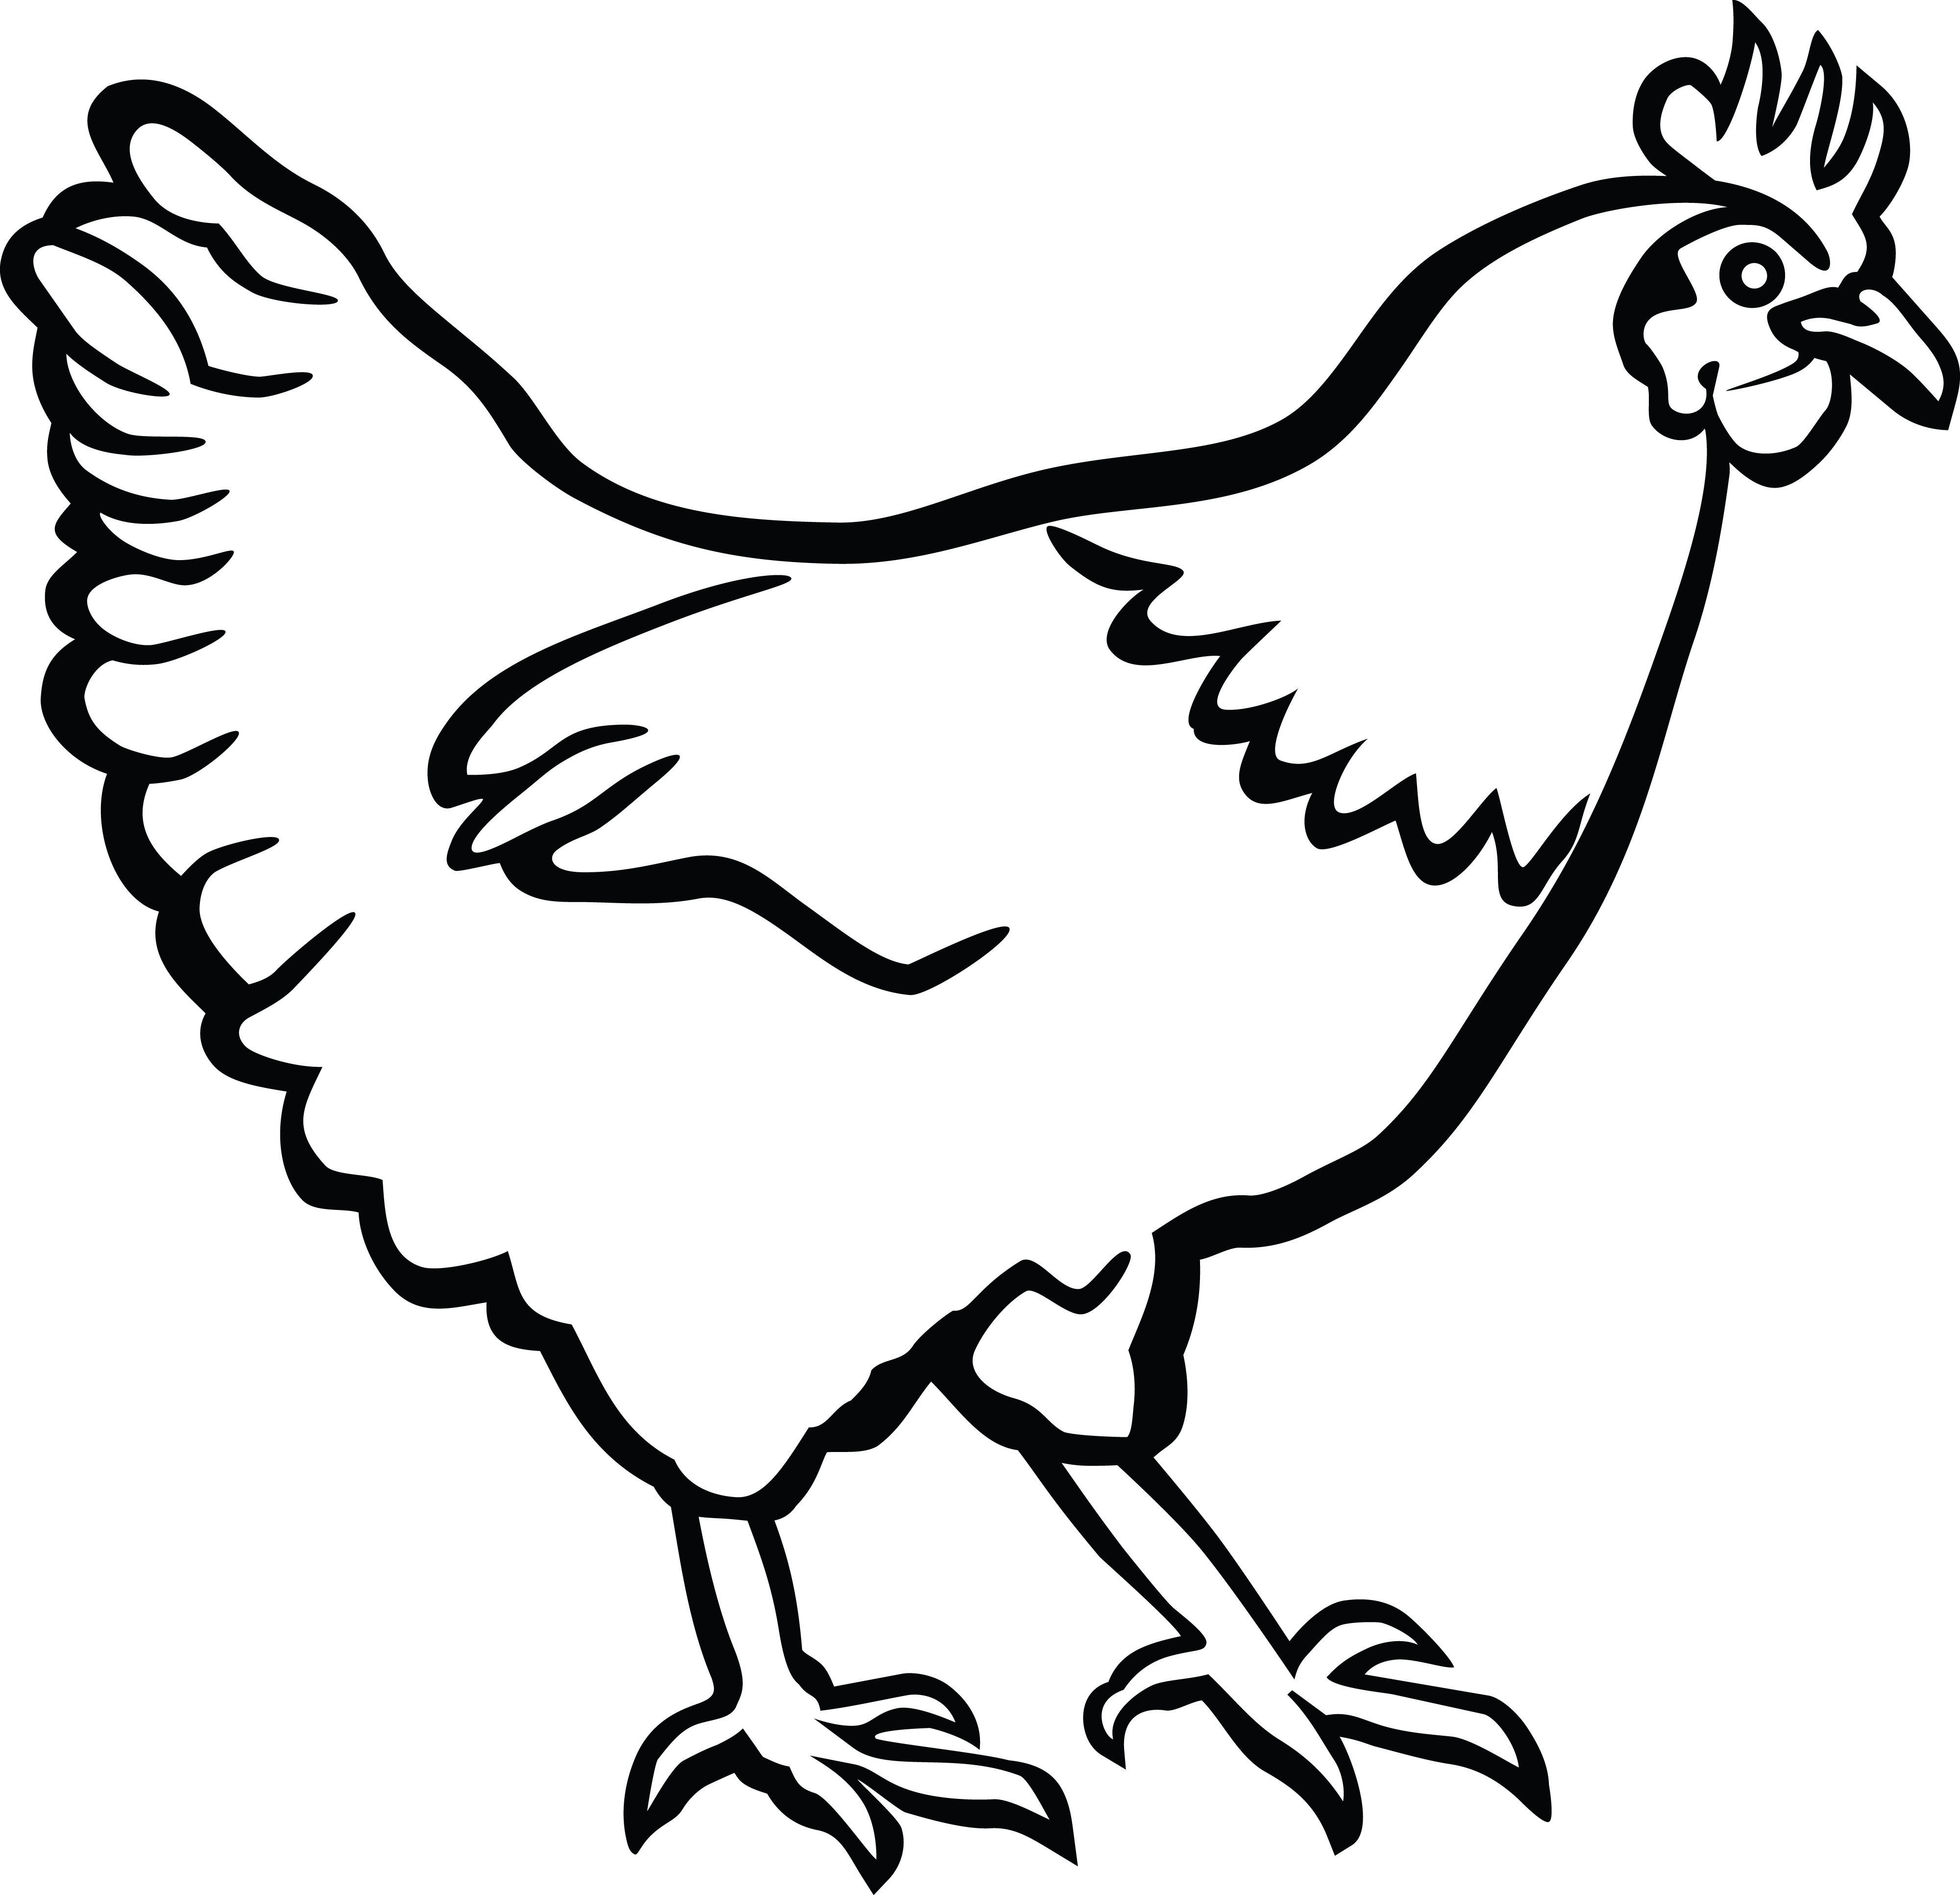 Chicken clipart outline, Chicken outline Transparent FREE for download